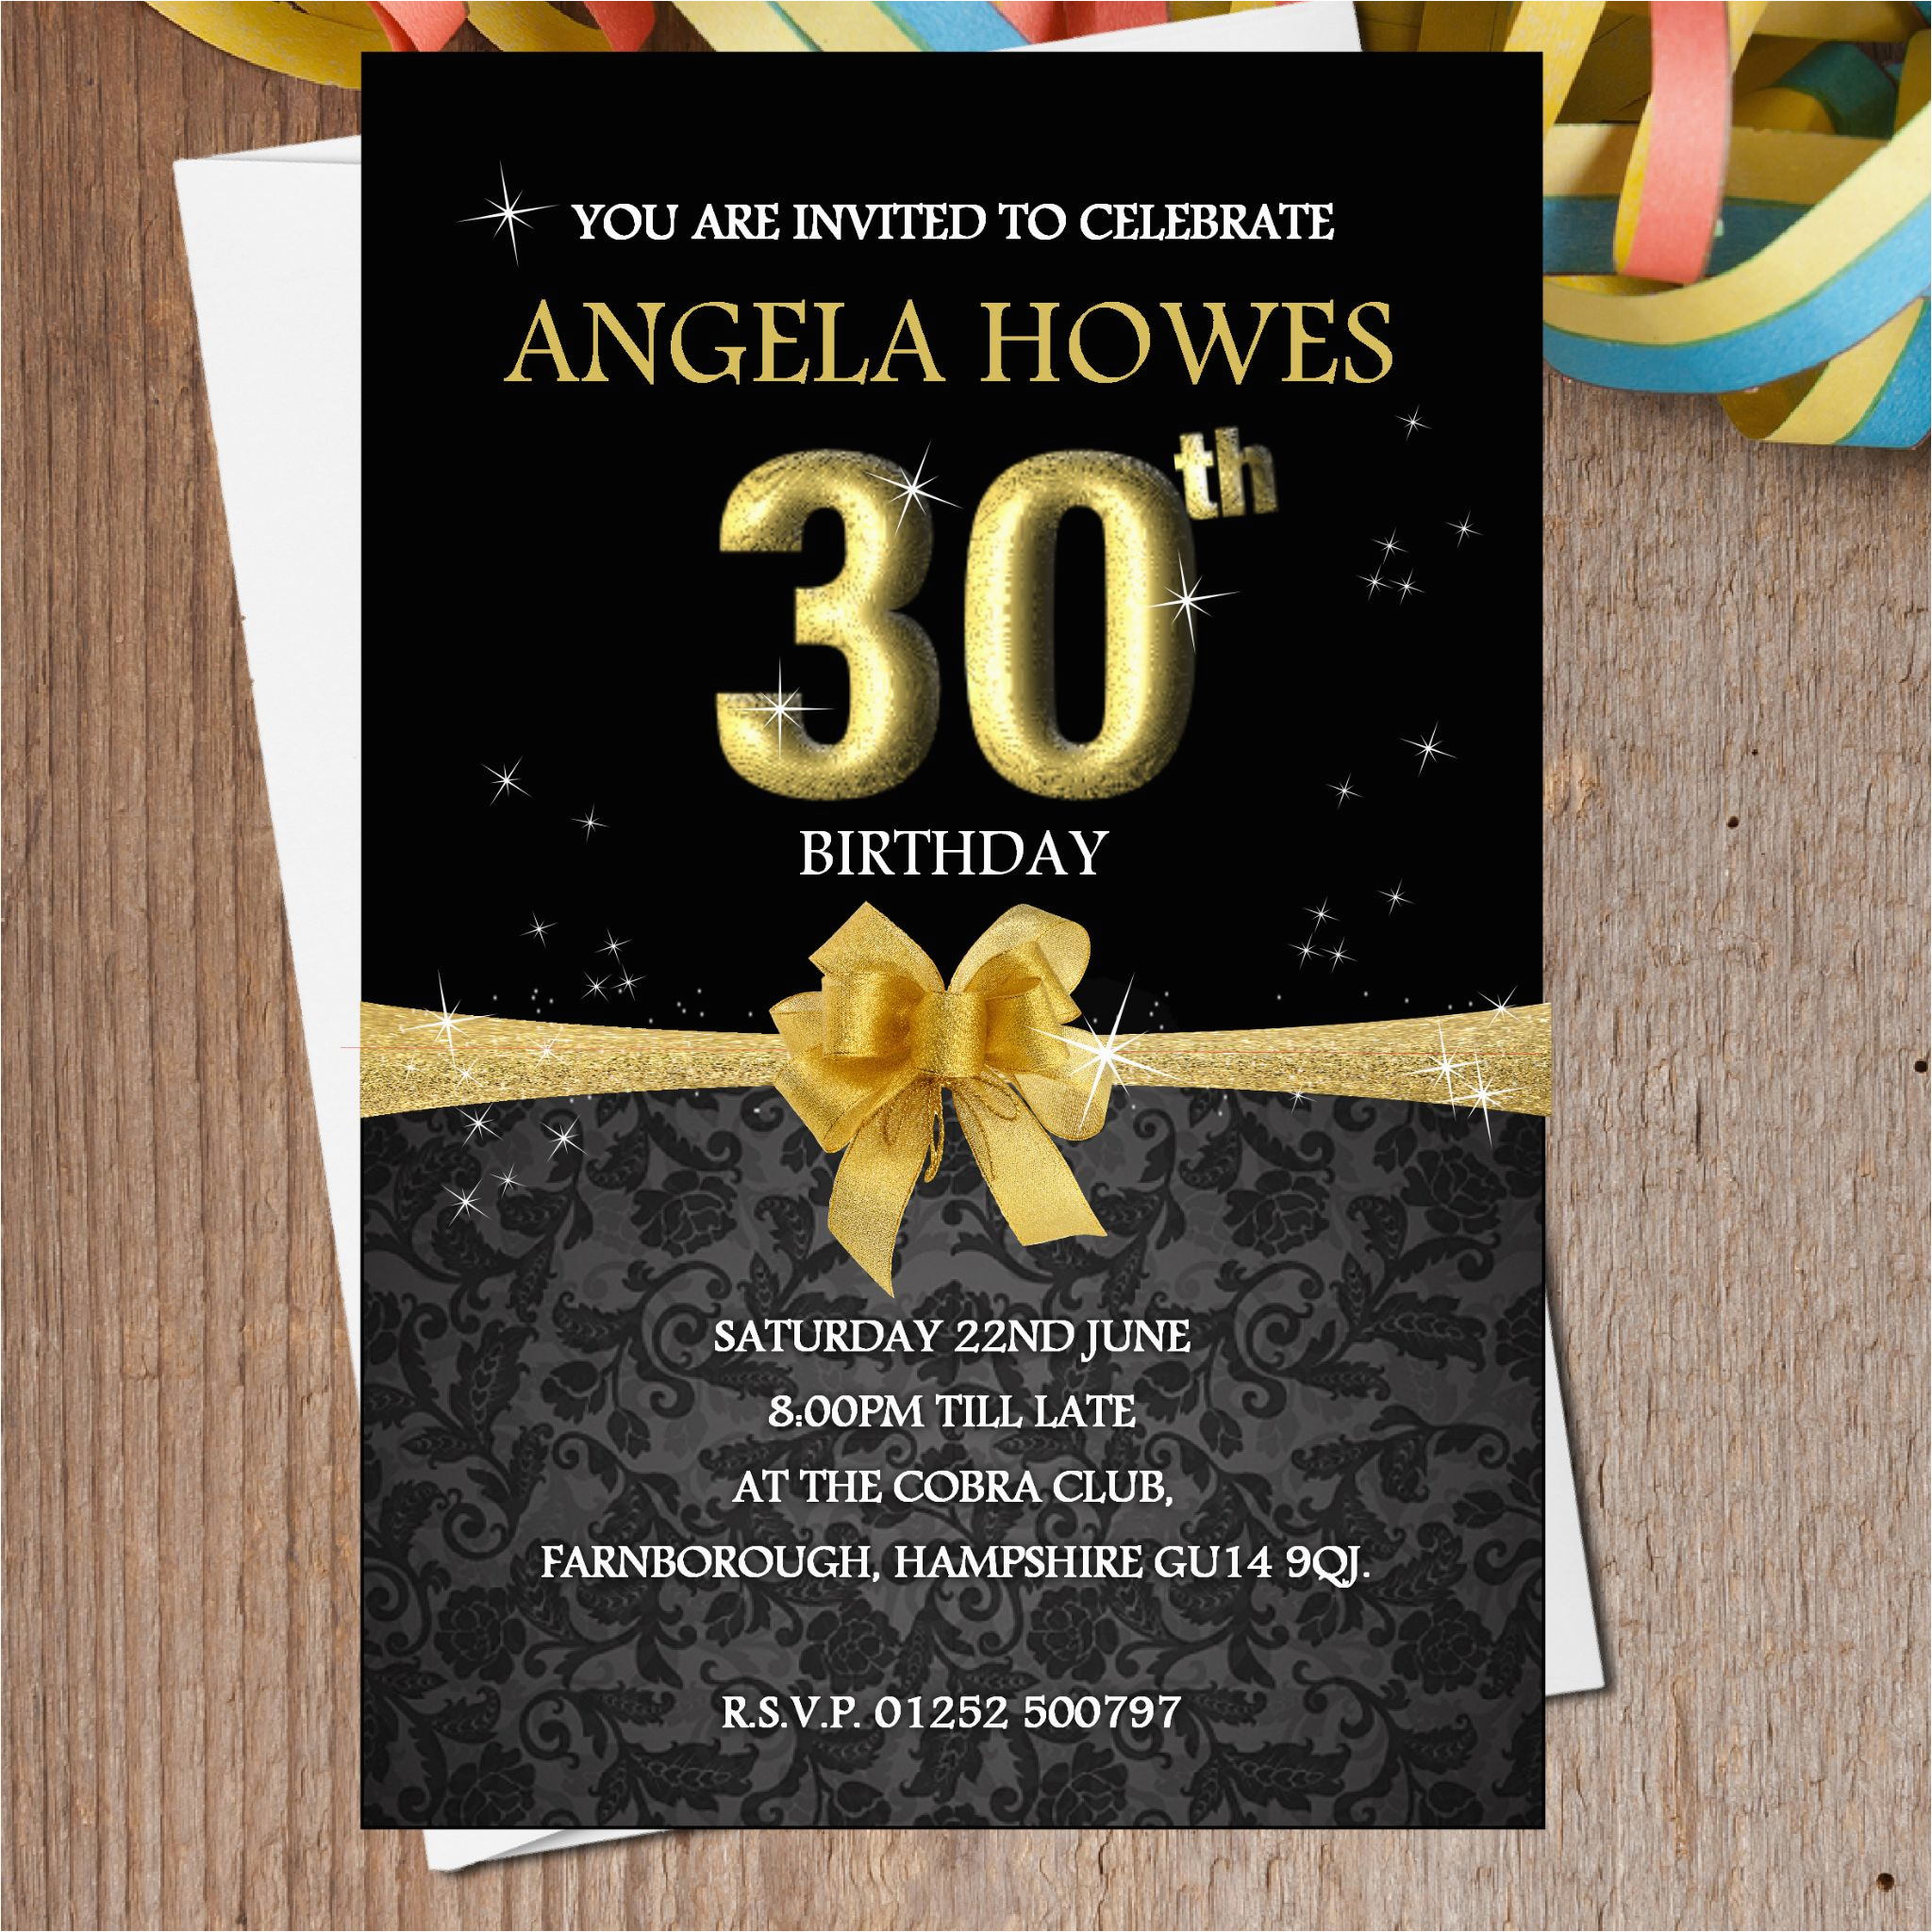 10 personalised black gold birthday party invitations n193 14148 p